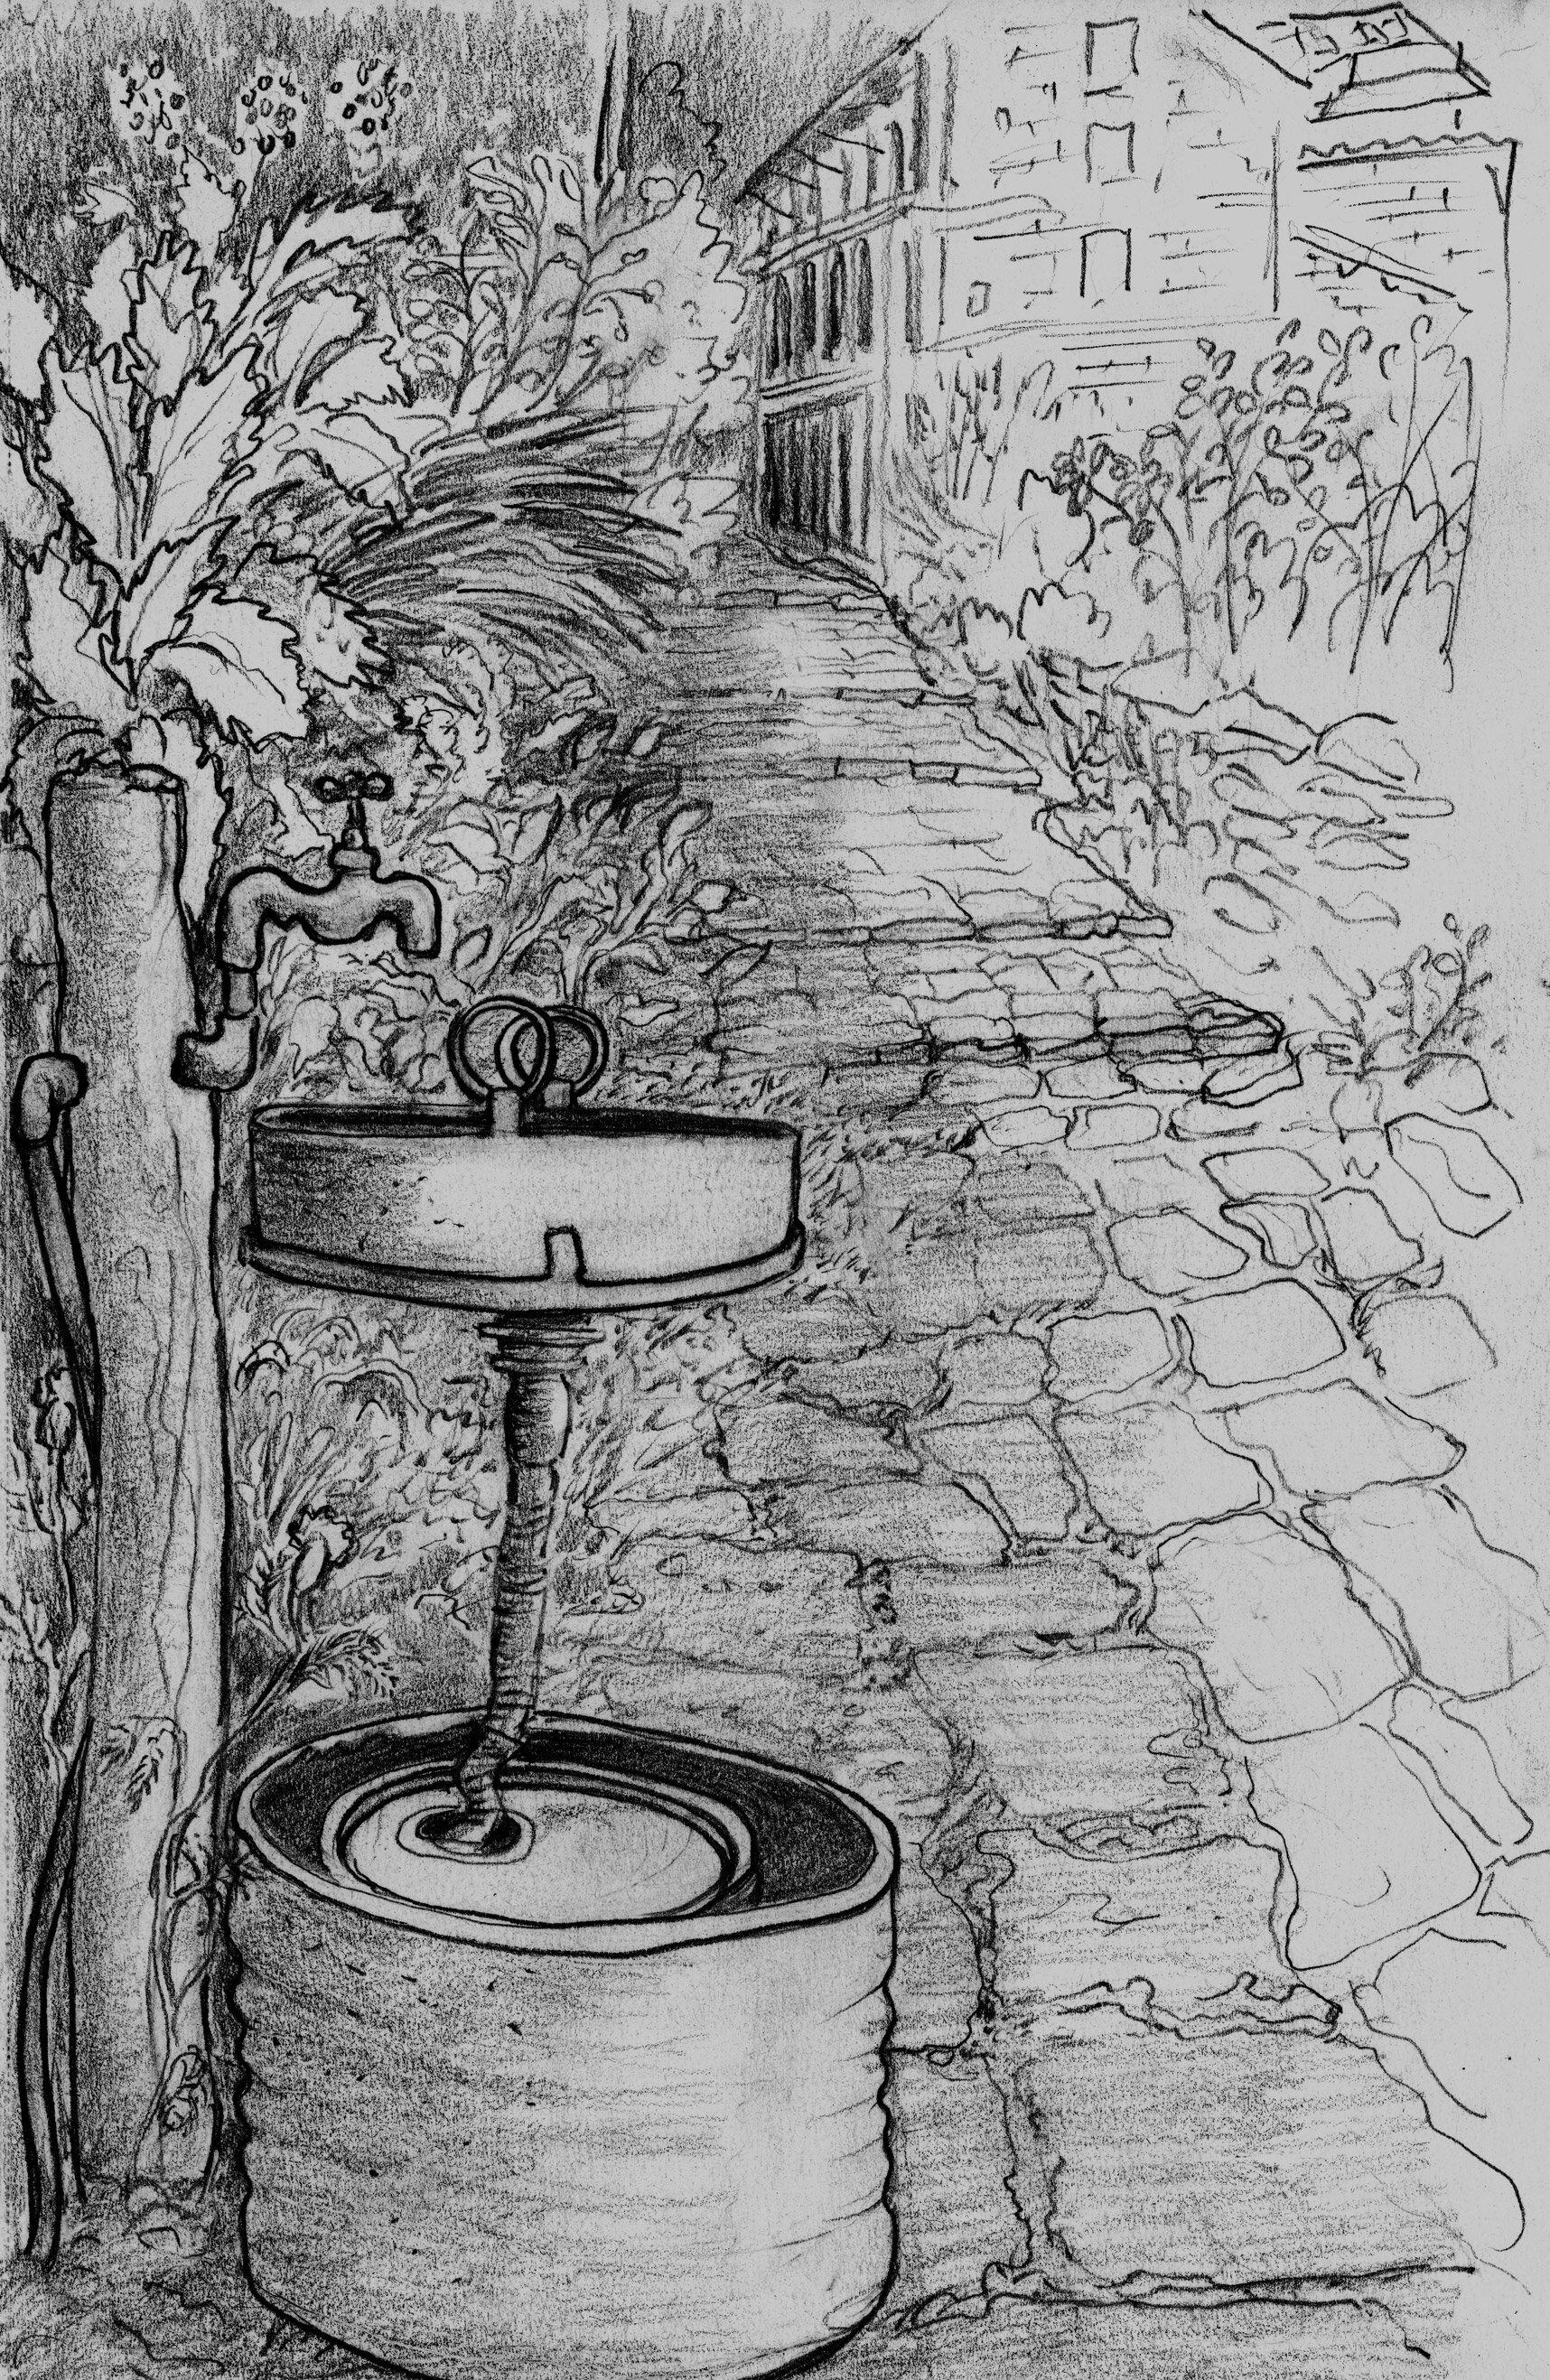   Bandipur Nepal Rustic Tap  2017 Pencil on paper 8x5 inches 